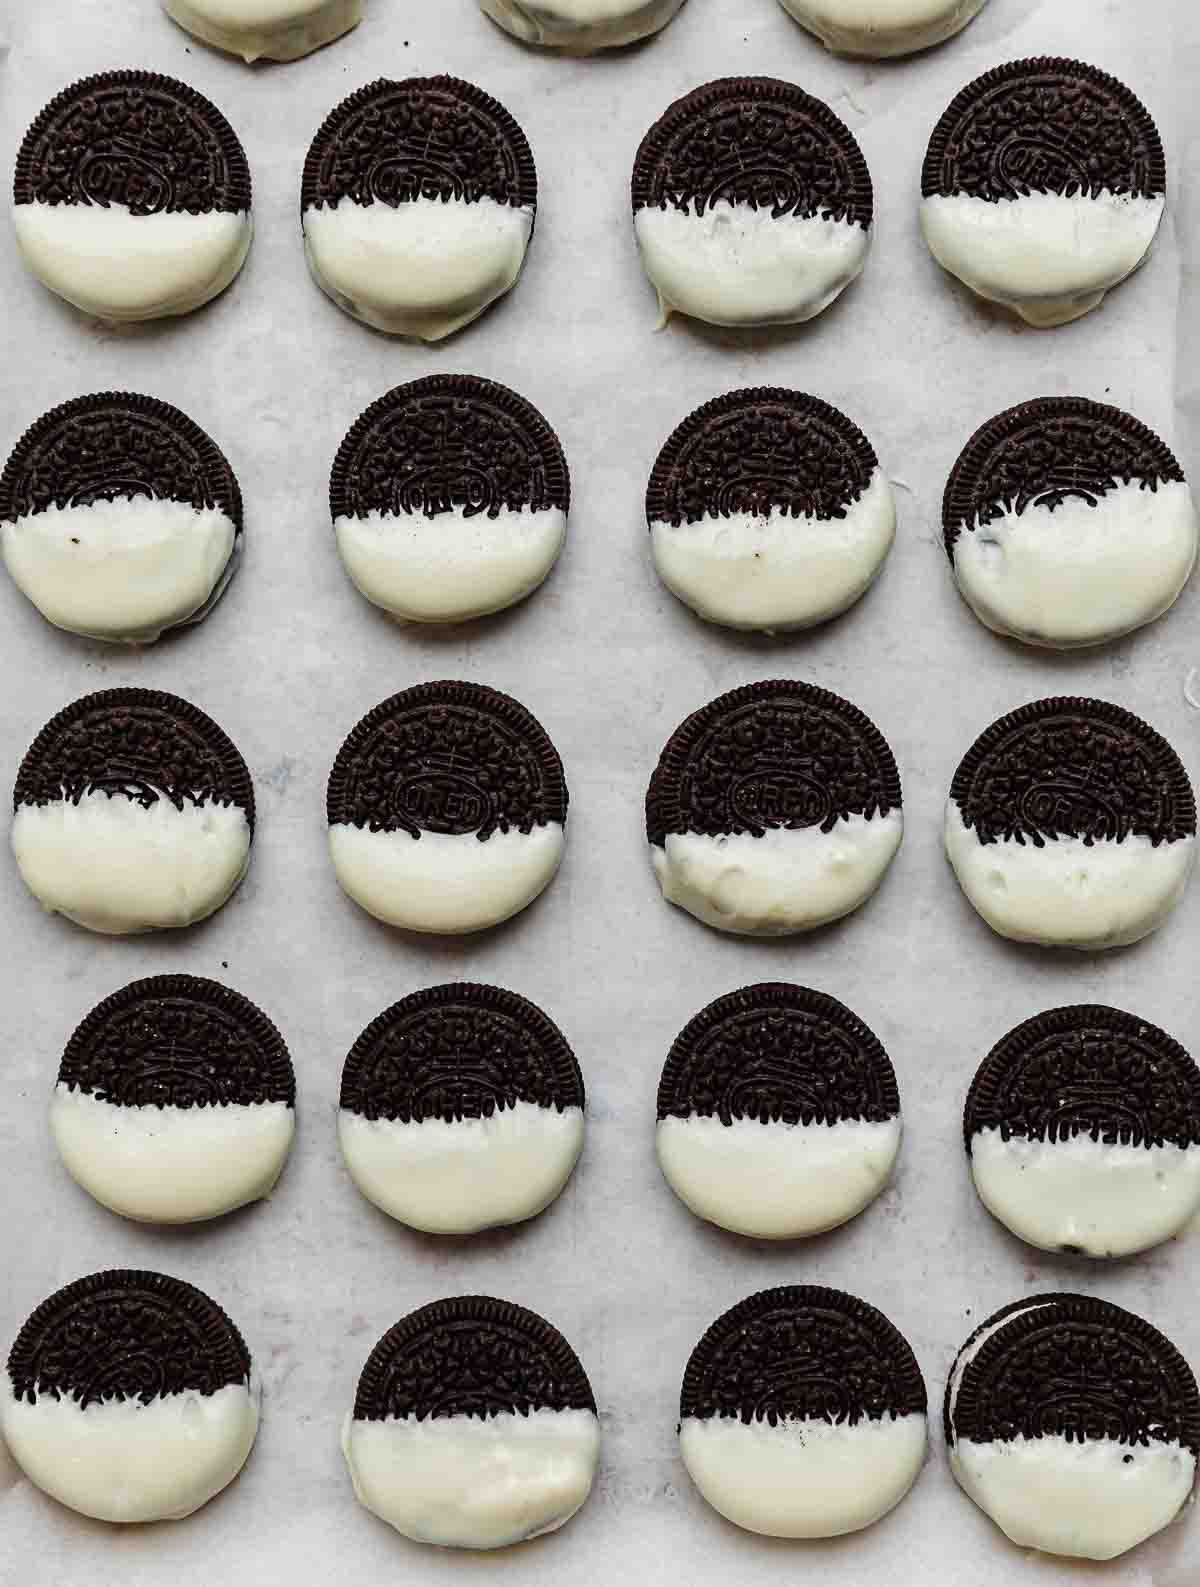 Half dipped white chocolate Oreos on a parchment paper lined baking sheet.